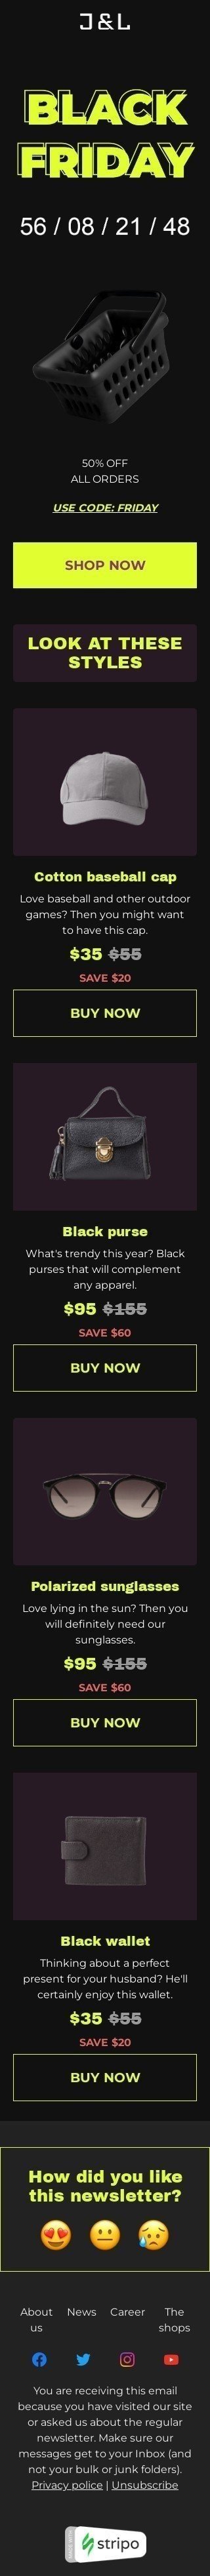 Black Friday Email Template "Look at these styles" for Fashion industry mobile view